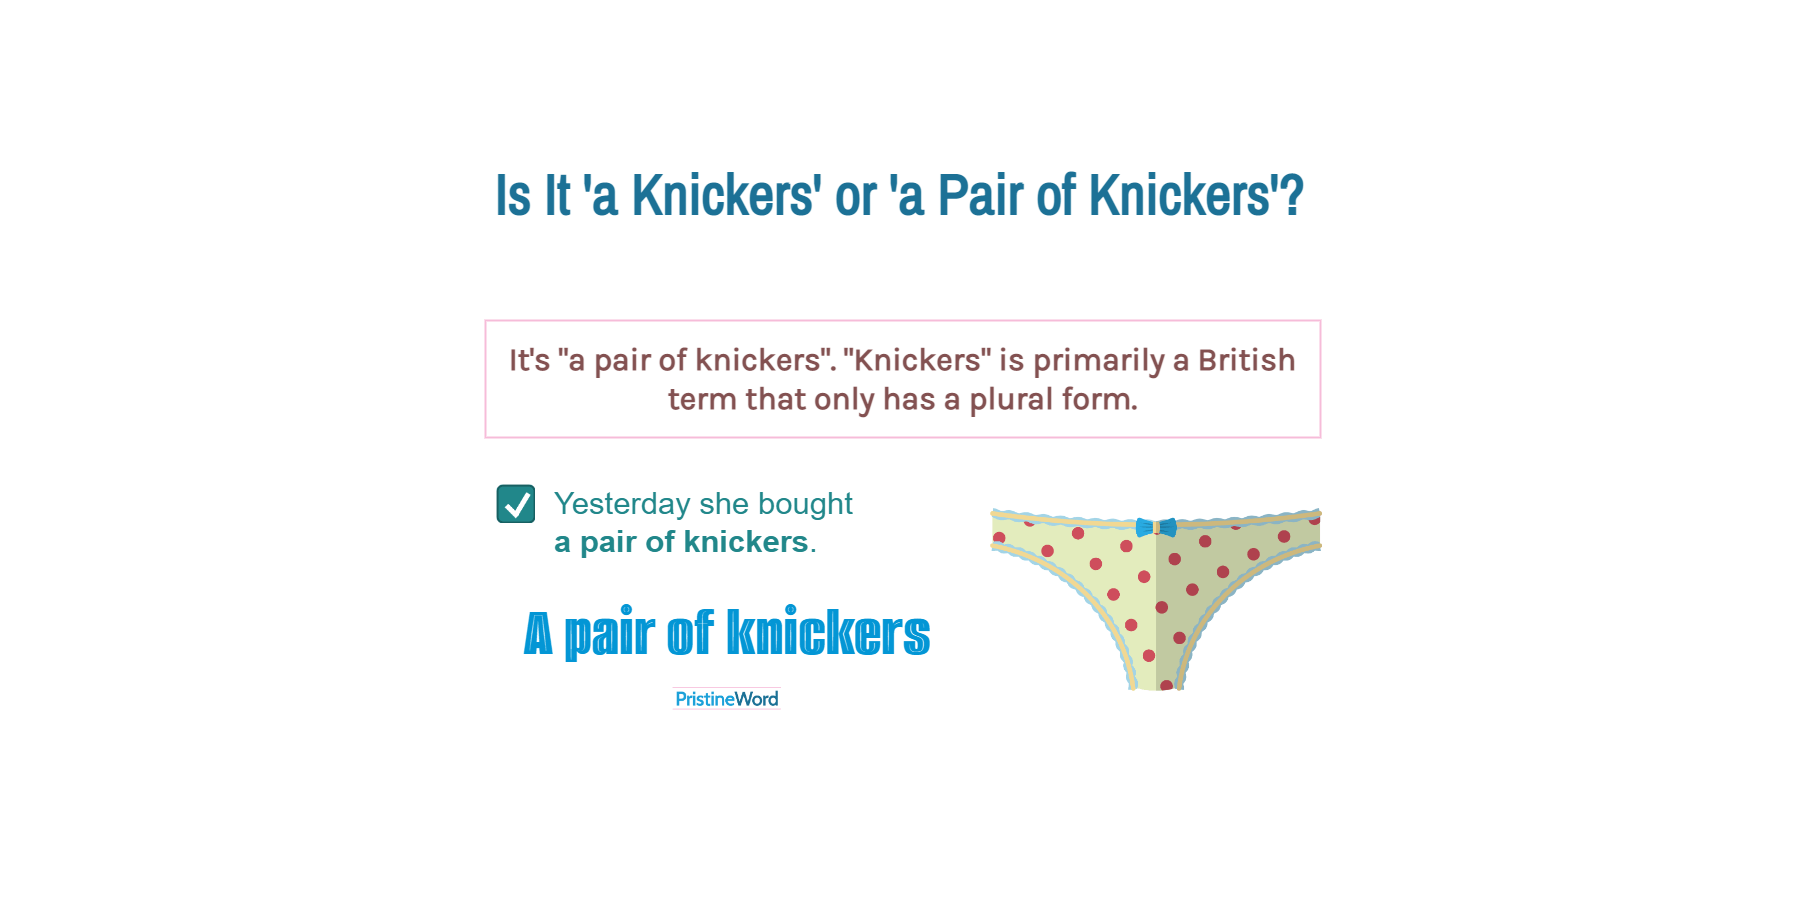 https://www.pristineword.com/content/images/size/w1200/2022/07/GRA213---A-PAIR-OF-KNICKERS.png